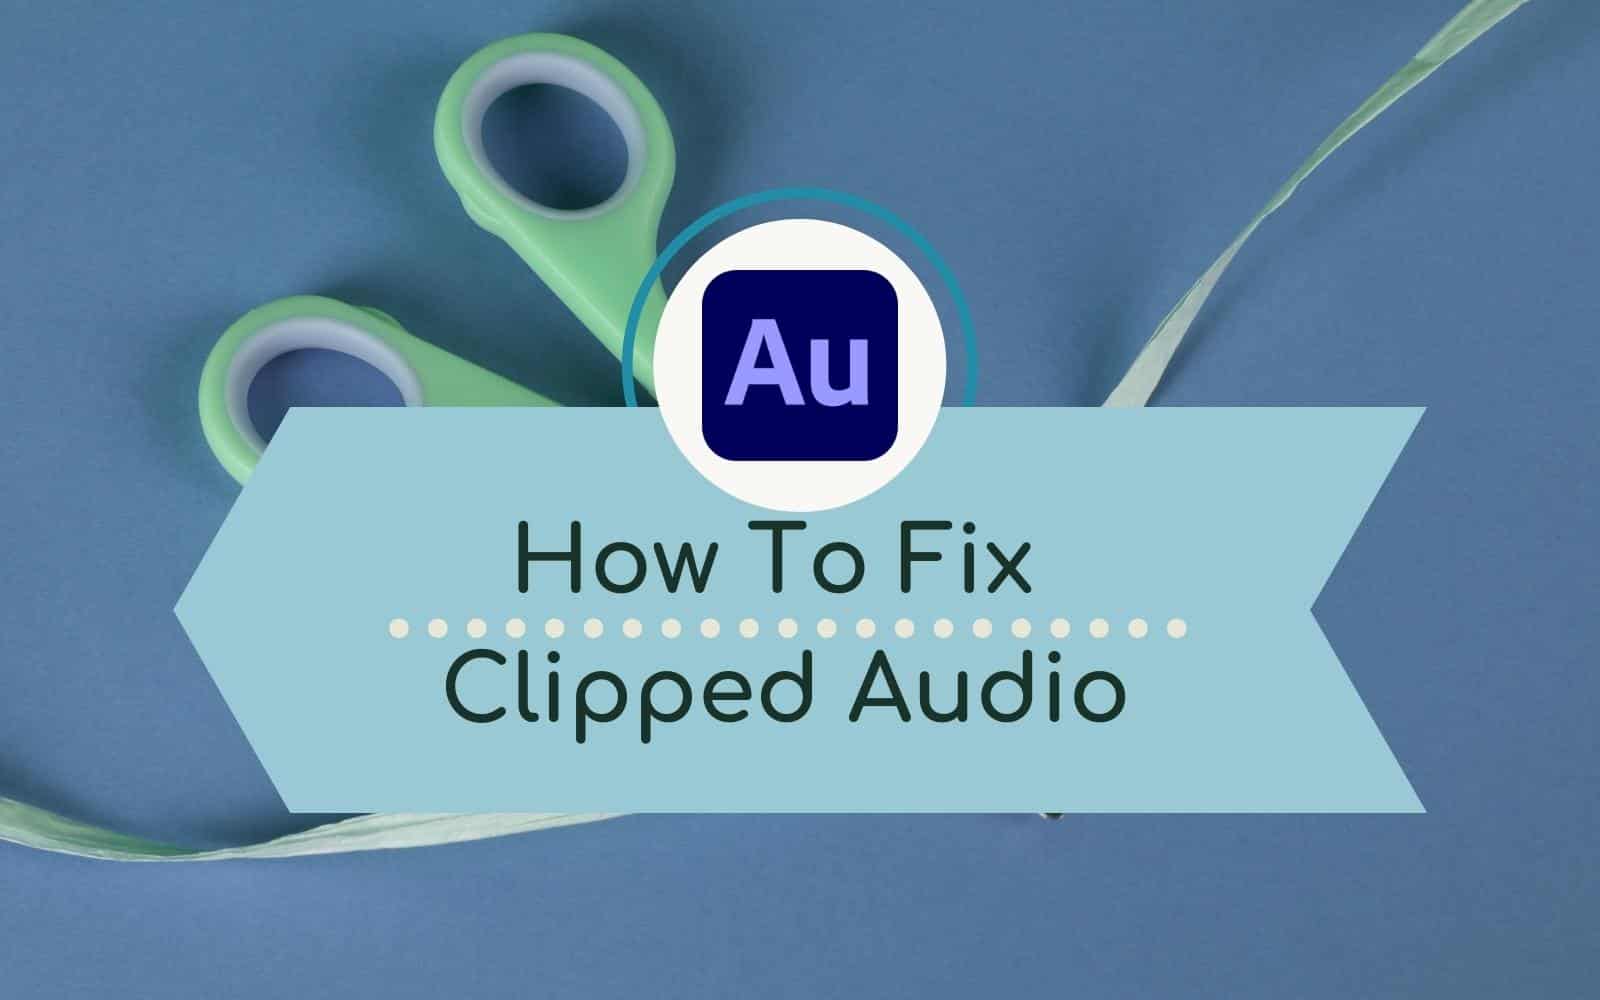 How To Fix Clipped Audio in Adobe Audition